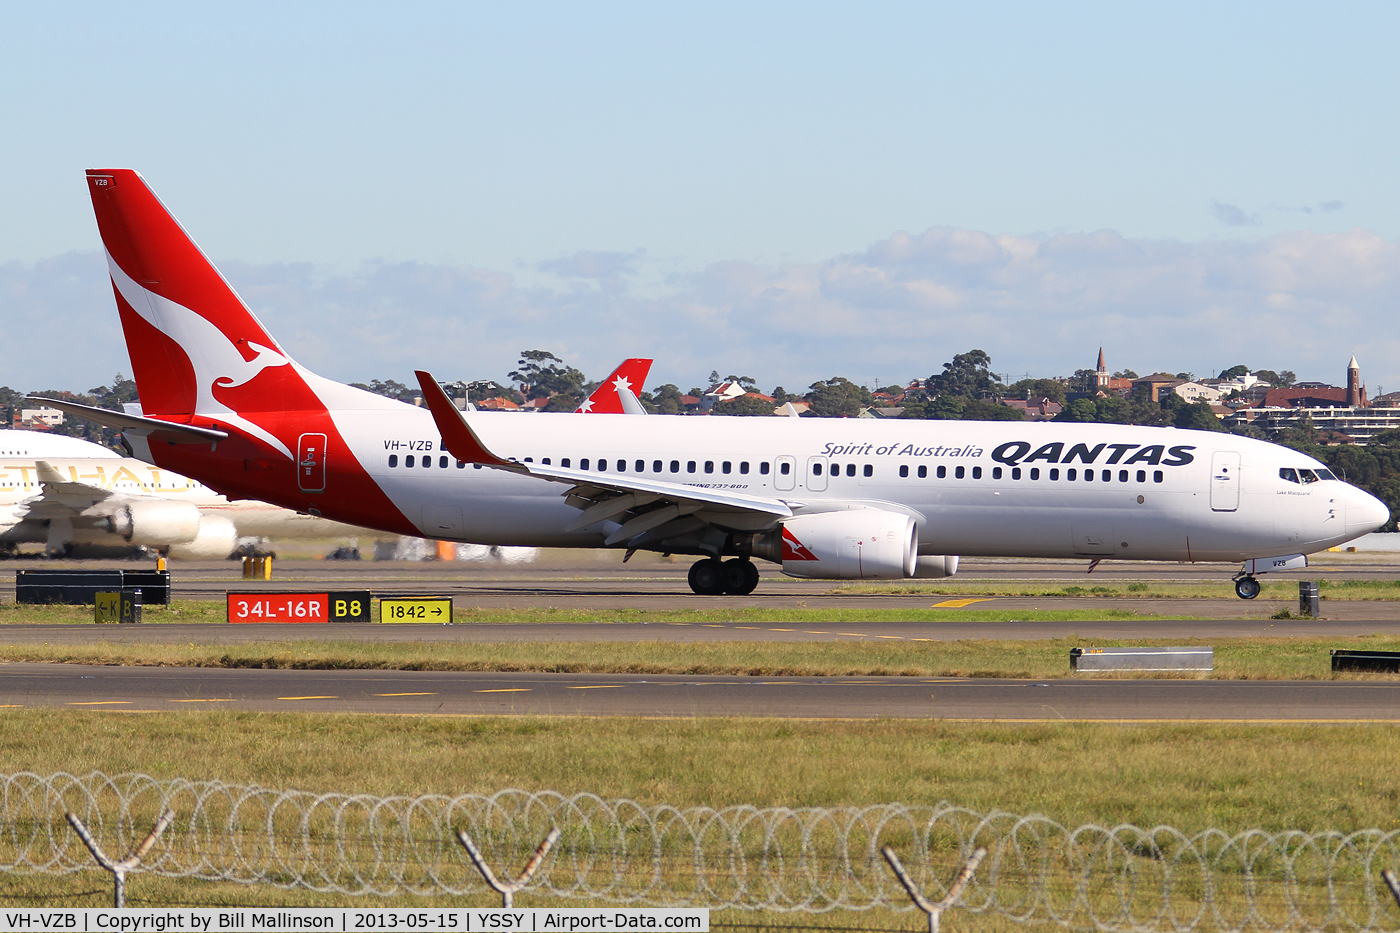 VH-VZB, 2008 Boeing 737-838 C/N 34196, TAXI FROM 34R